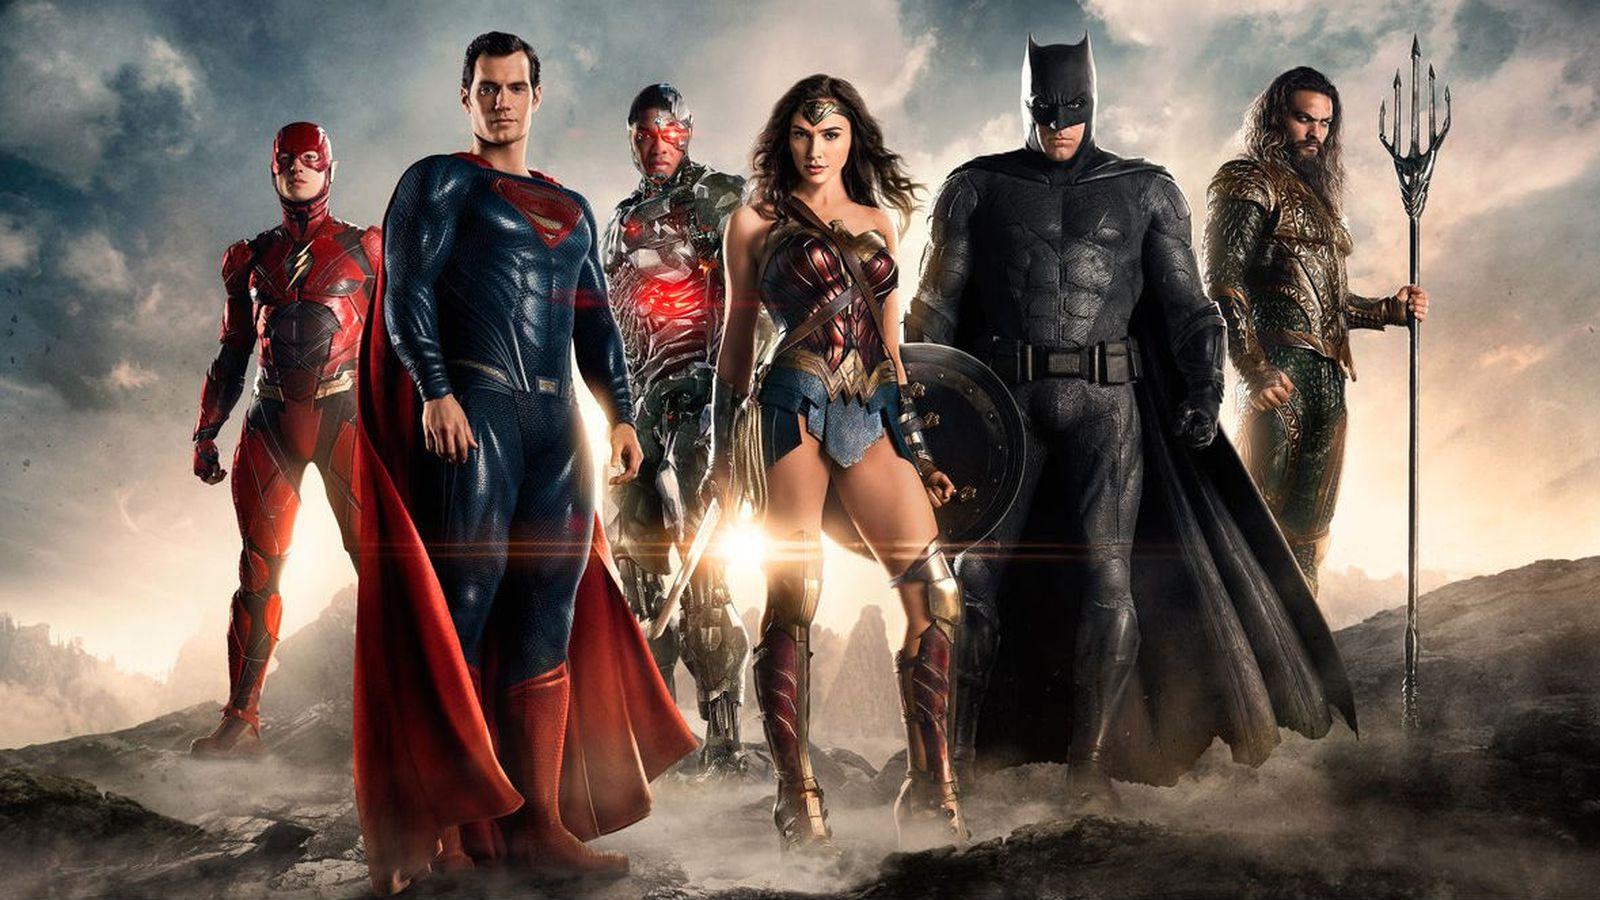 Zack Snyder's Justice League stand dramatically